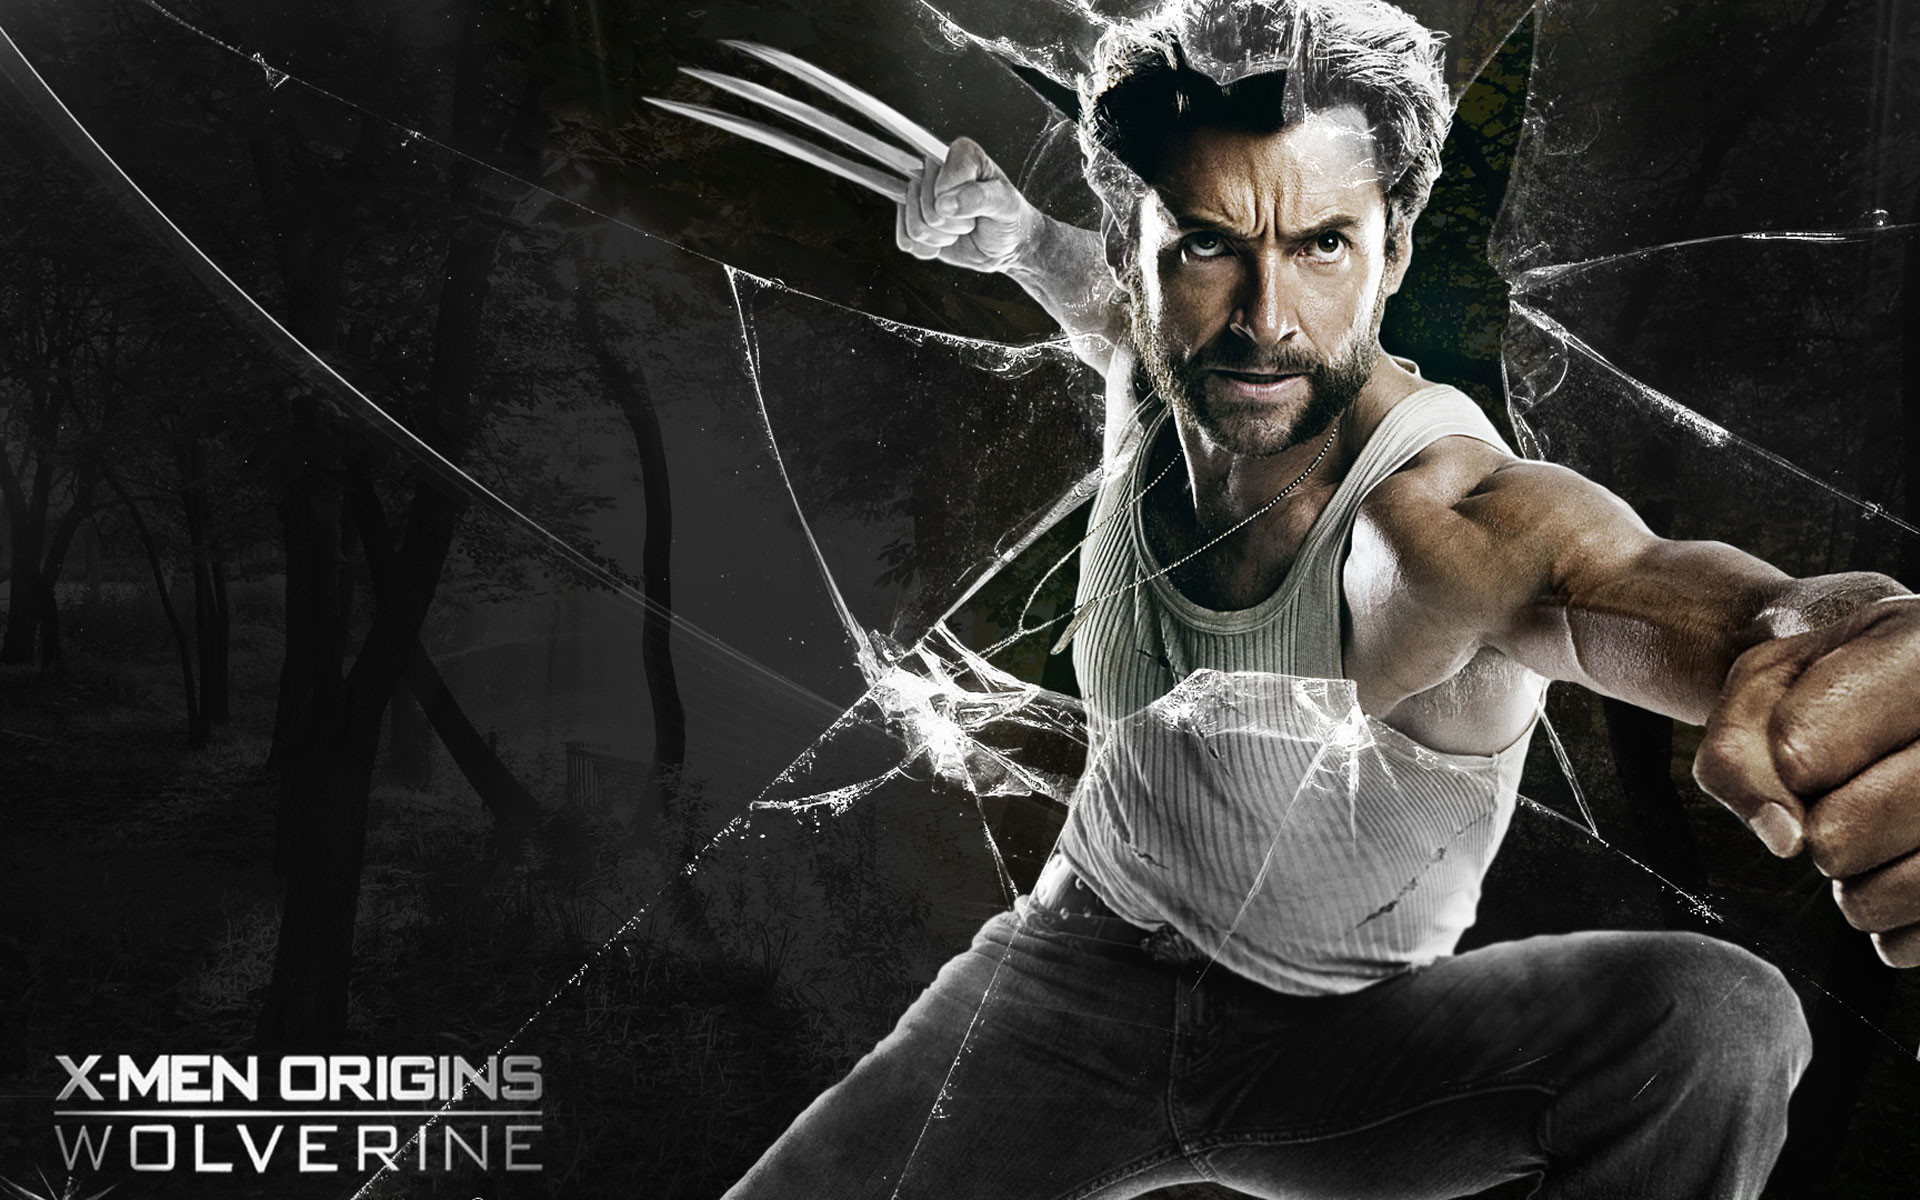 1920x1200 The Wolverine 2013 Movie wallpapers (16 Wallpapers)